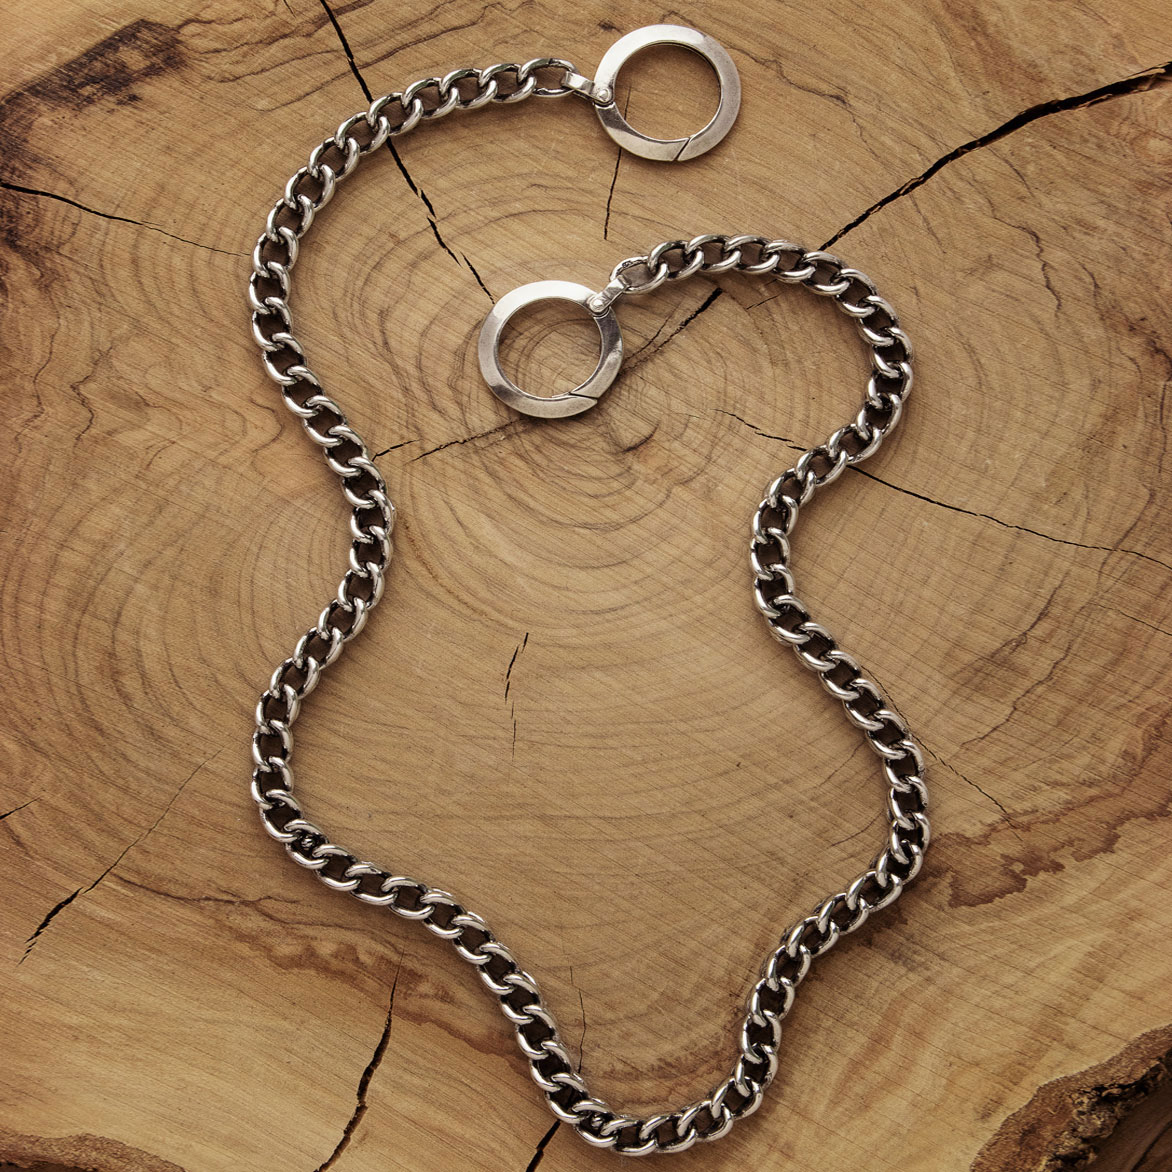 Silvertraits Thin Wallet Curb Chain Made of Sterling Silver